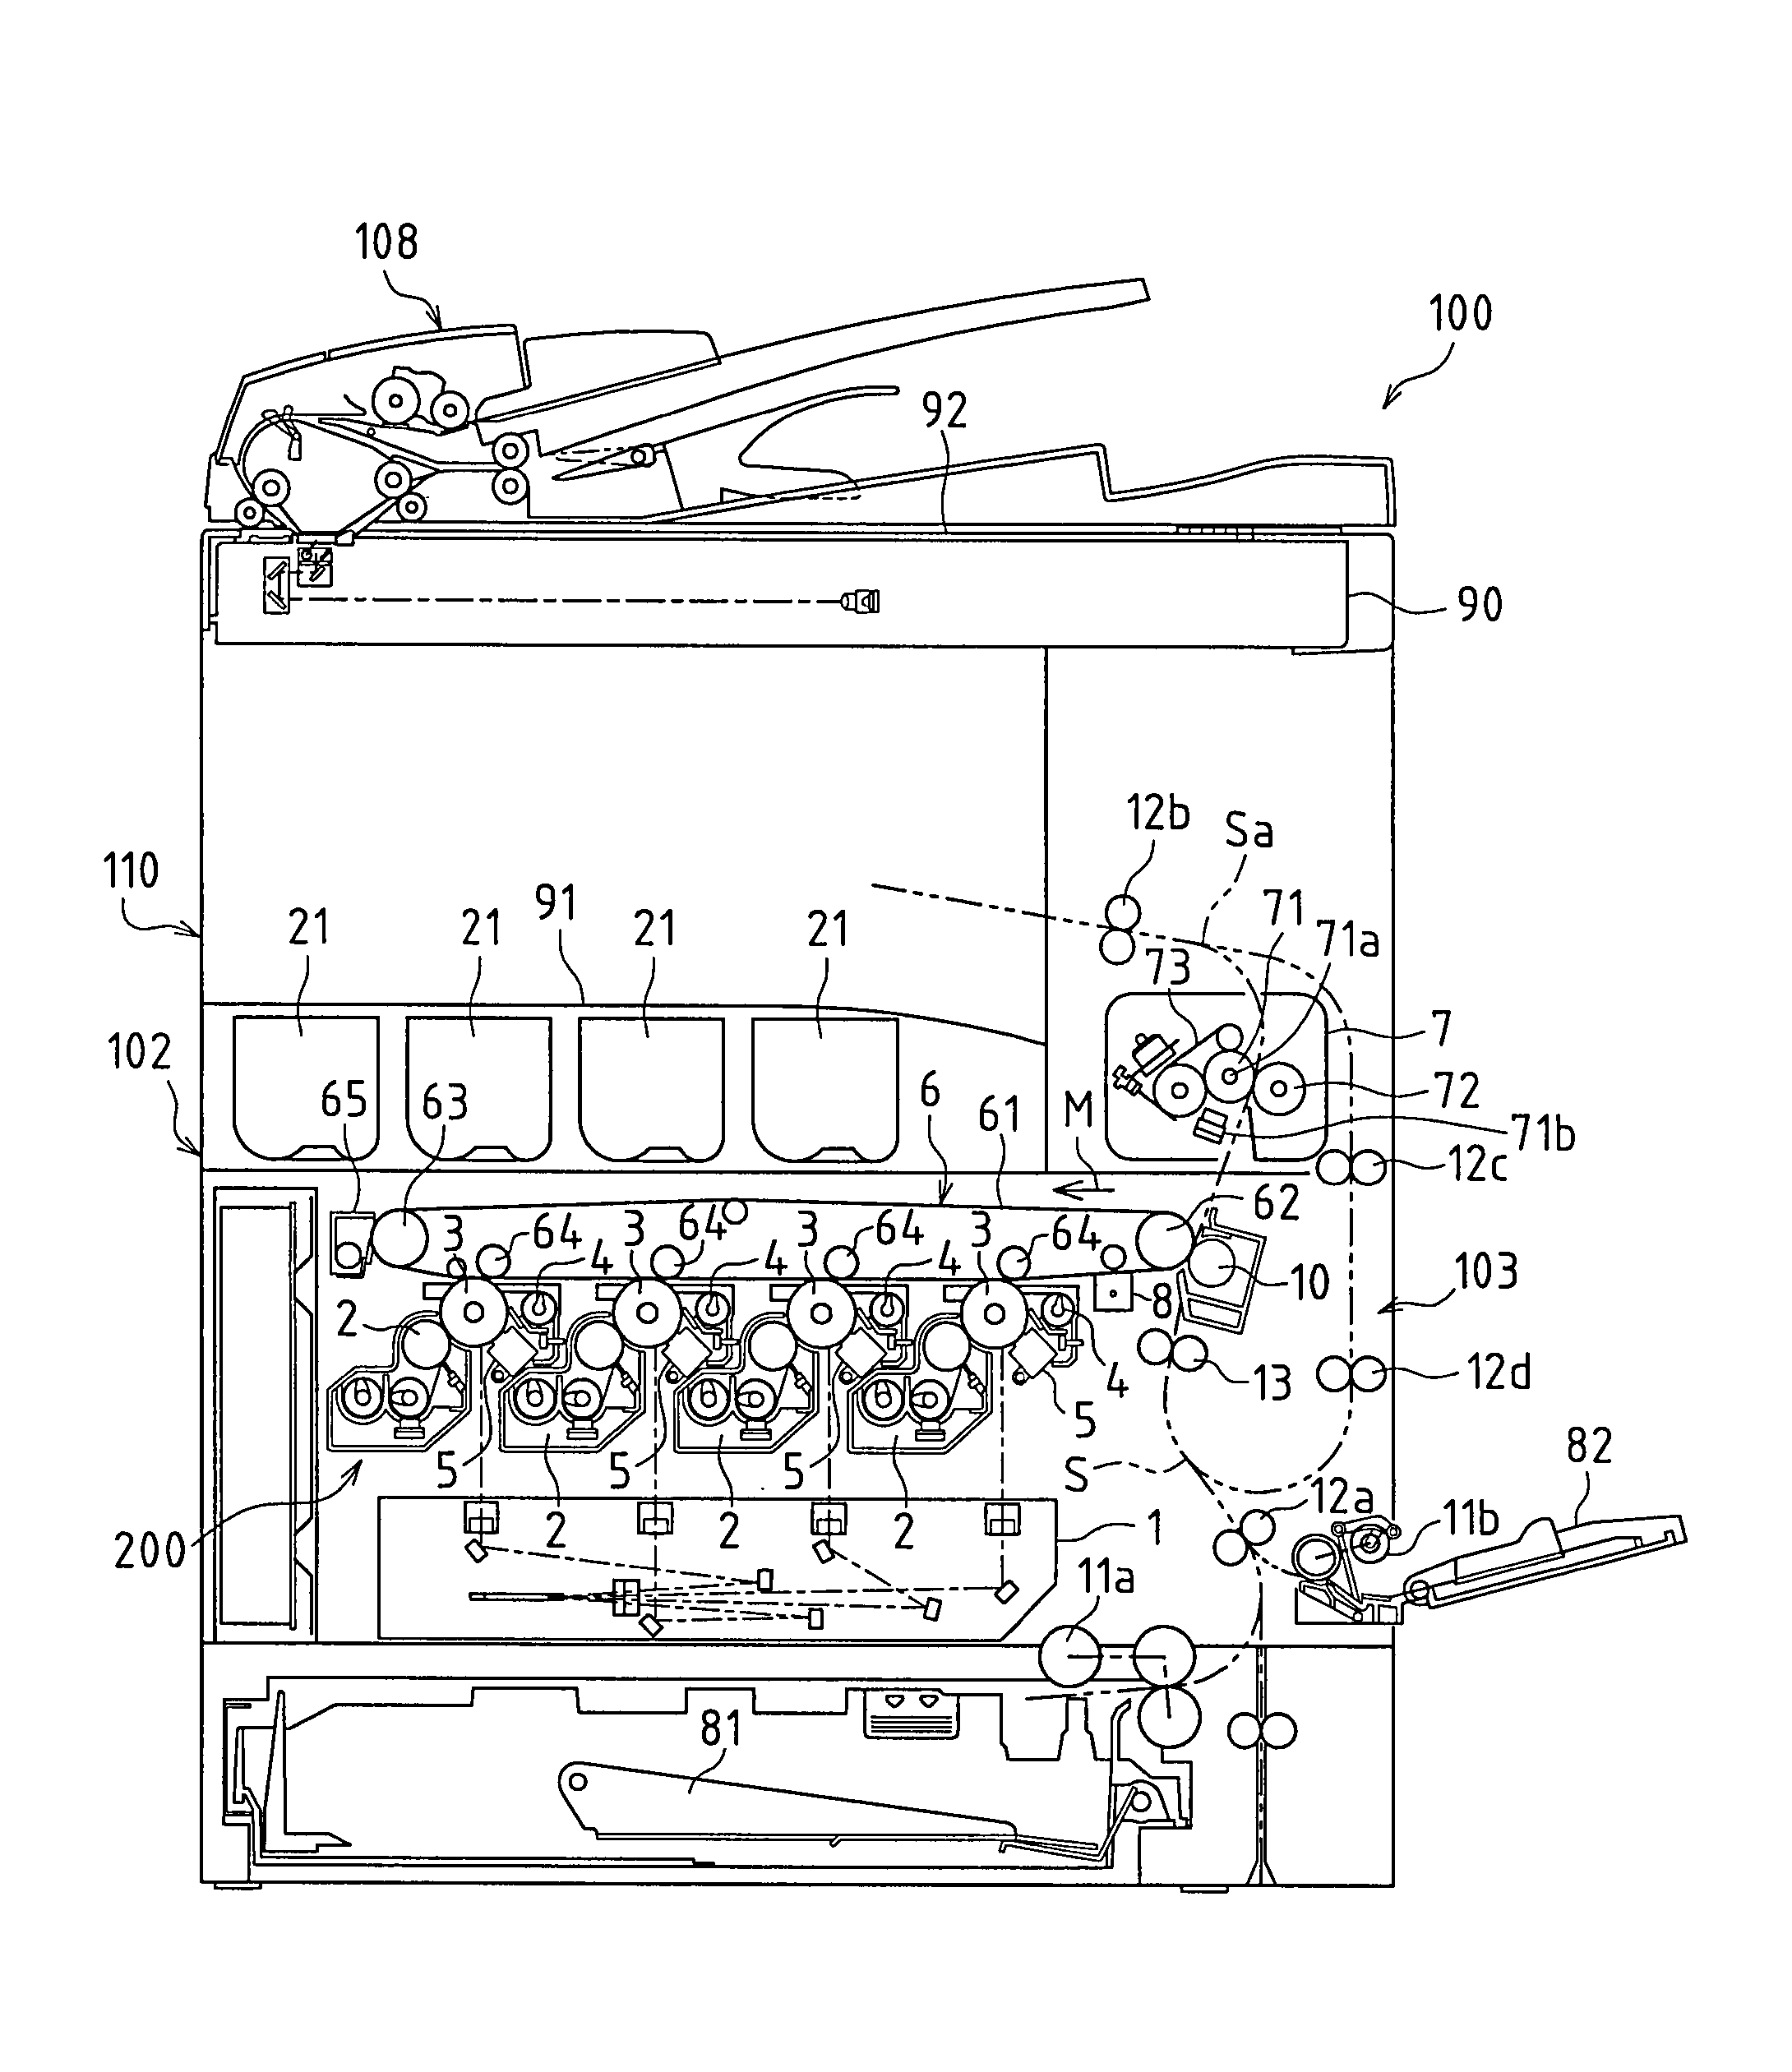 Image forming apparatus with resin frame and method for molding the resin frame